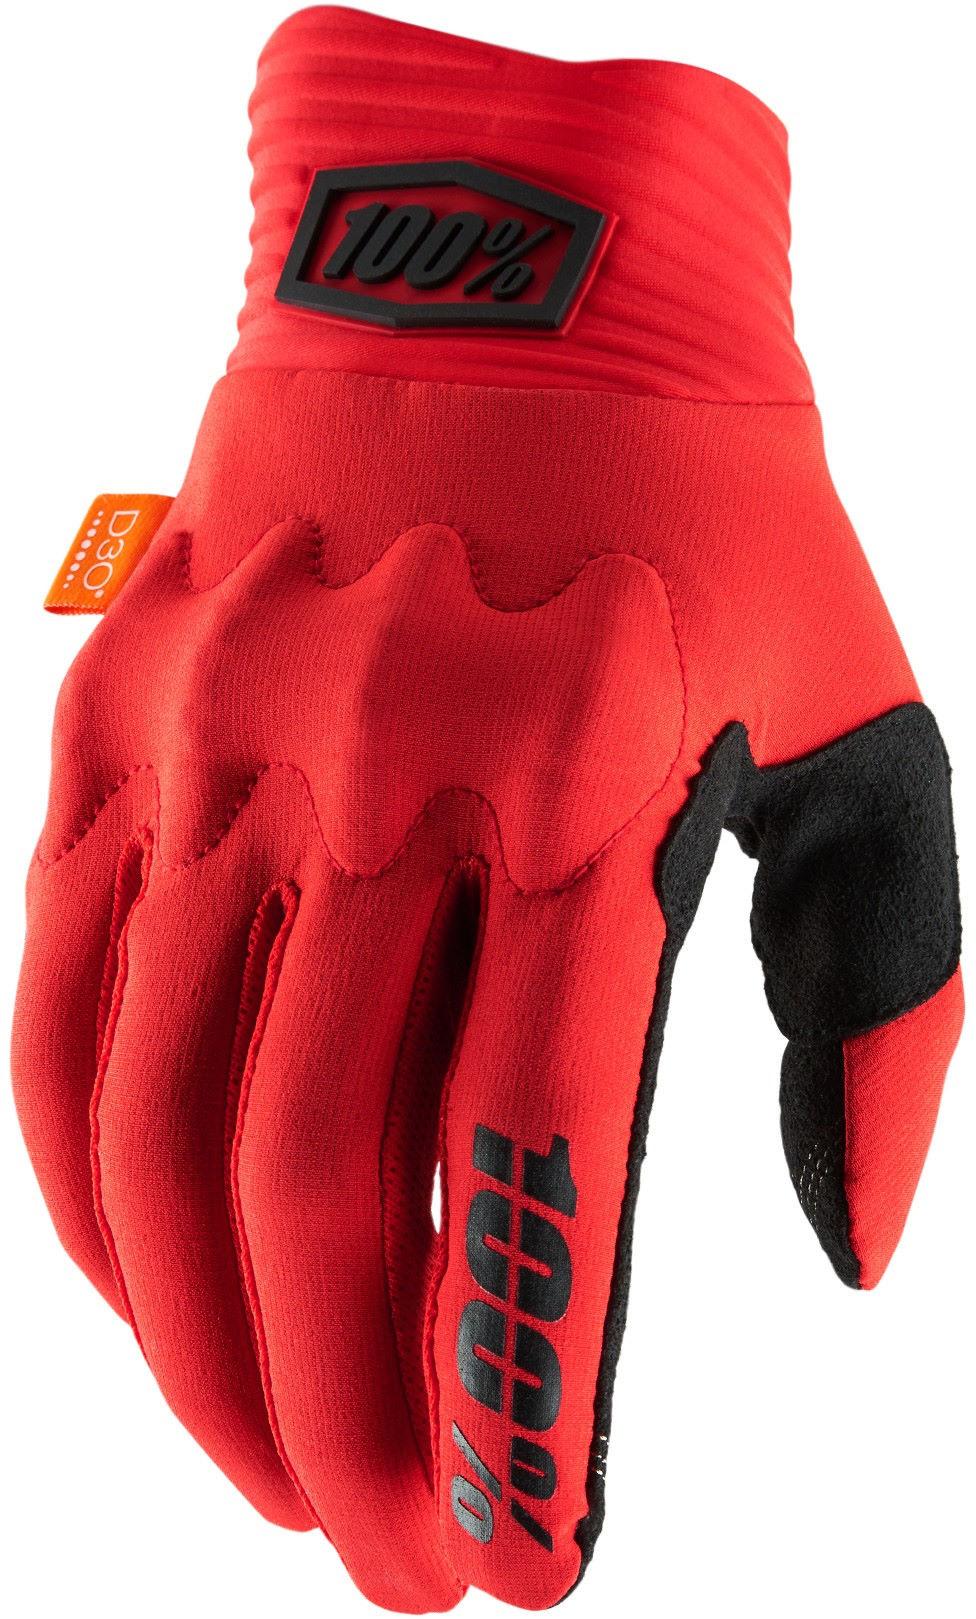 100% Cognito D3o Gloves - Red/black